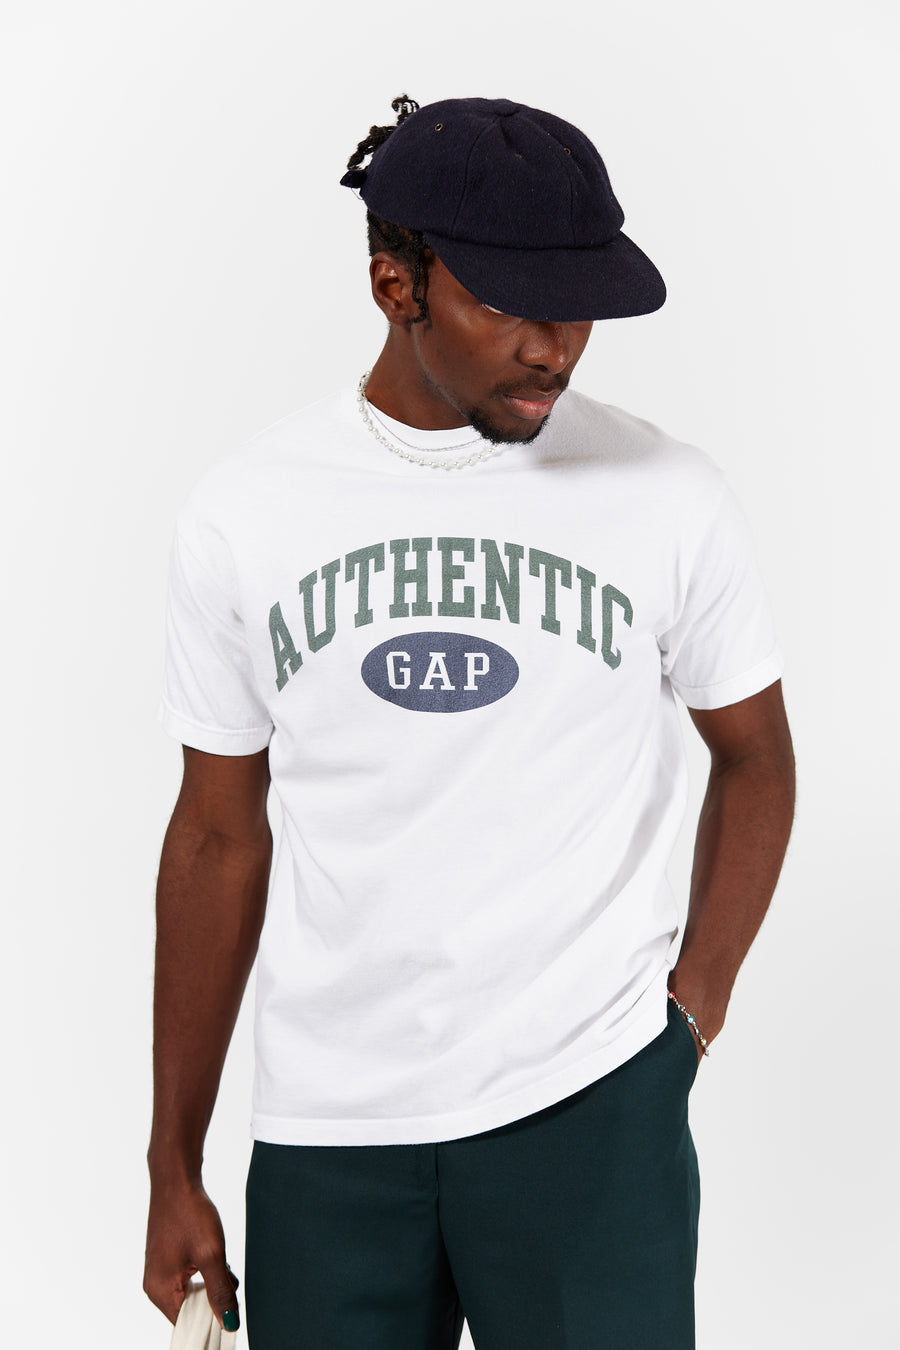 Gap Athentic Spellout T-shirt in a vintage style from thrift store Twise Studio